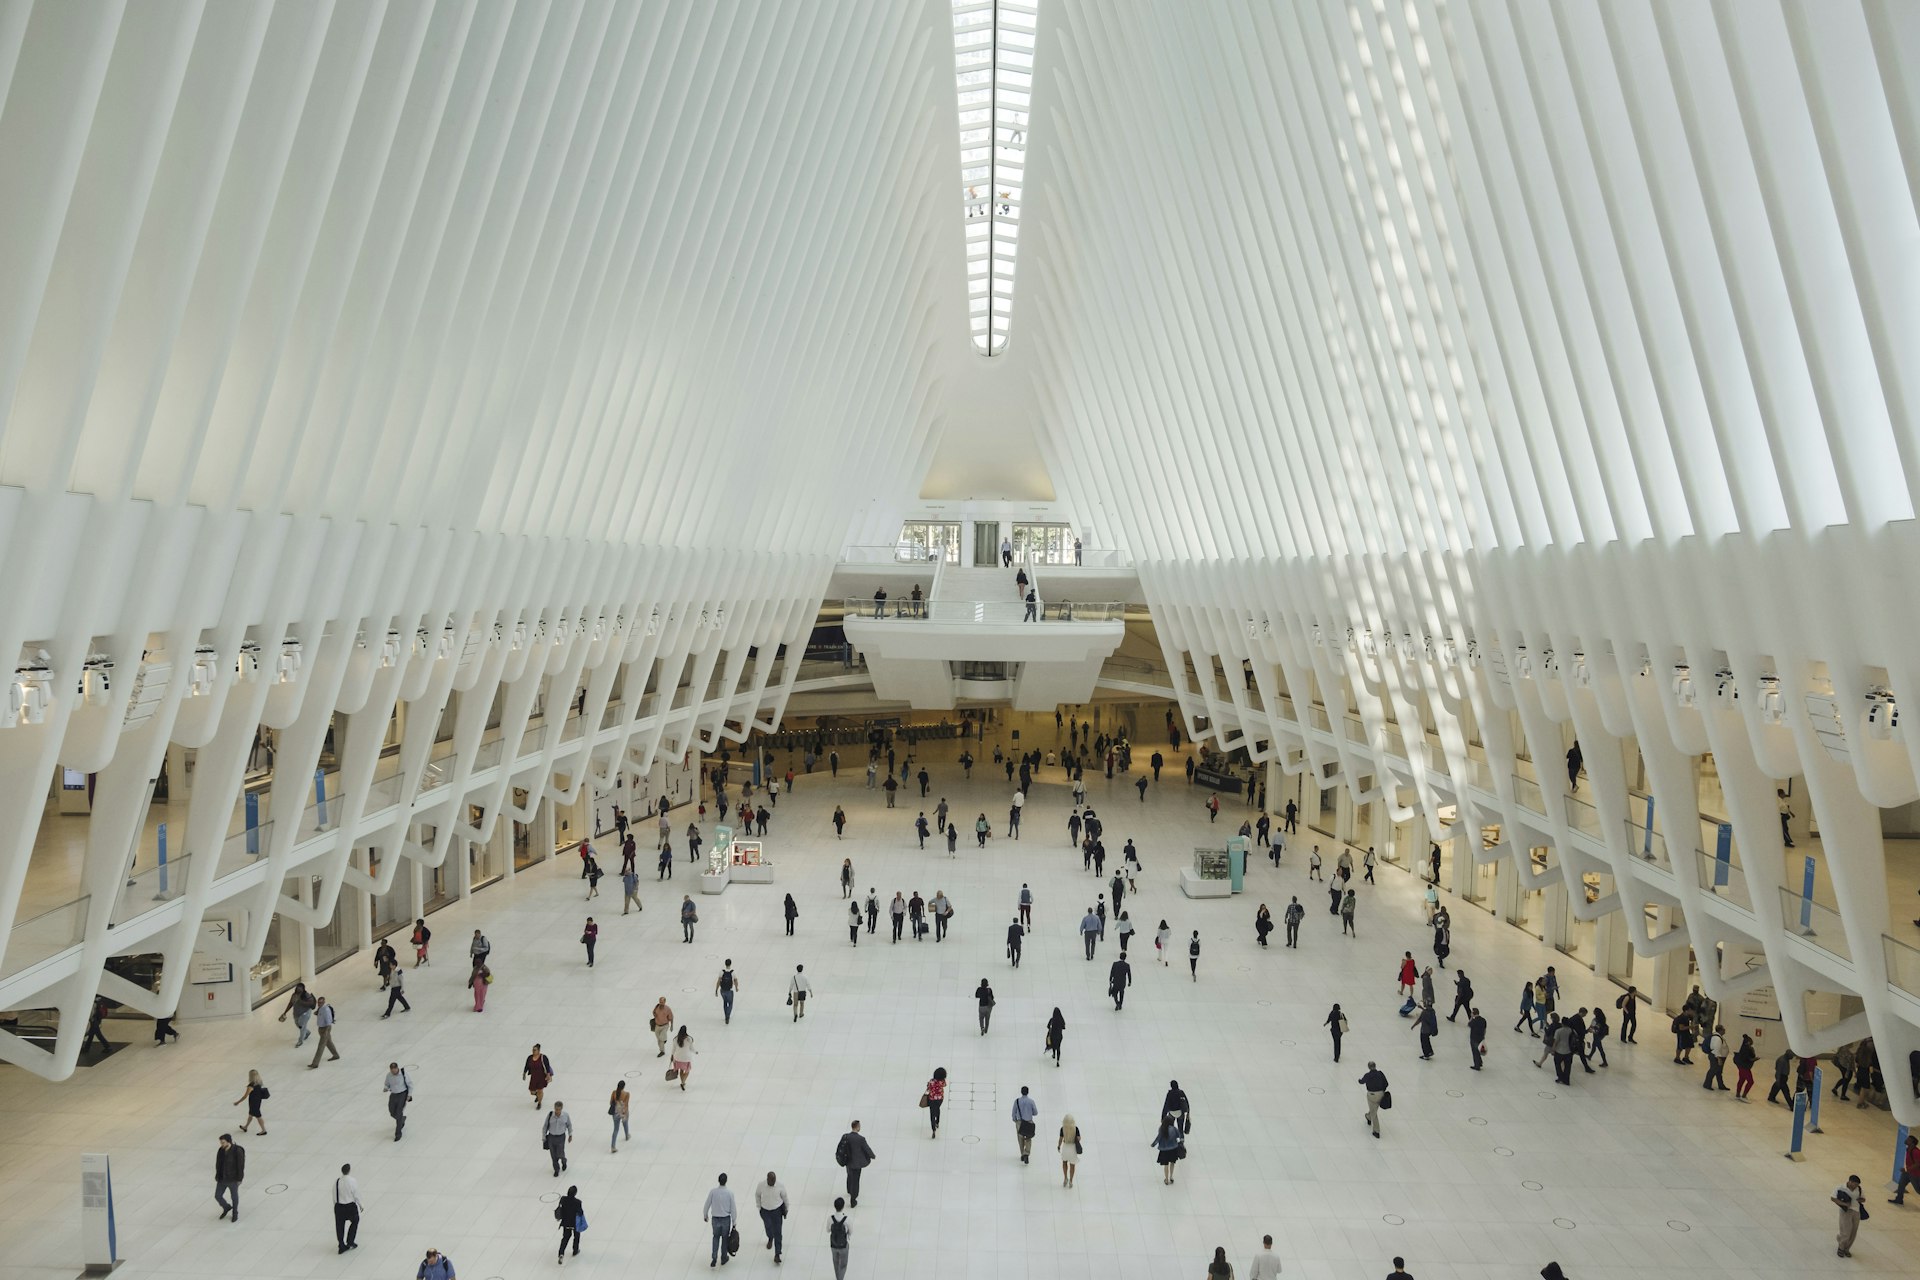 Morning commuters walk around the light-filled central hall (the Oculus) inside the World Trade Center PATH Station.